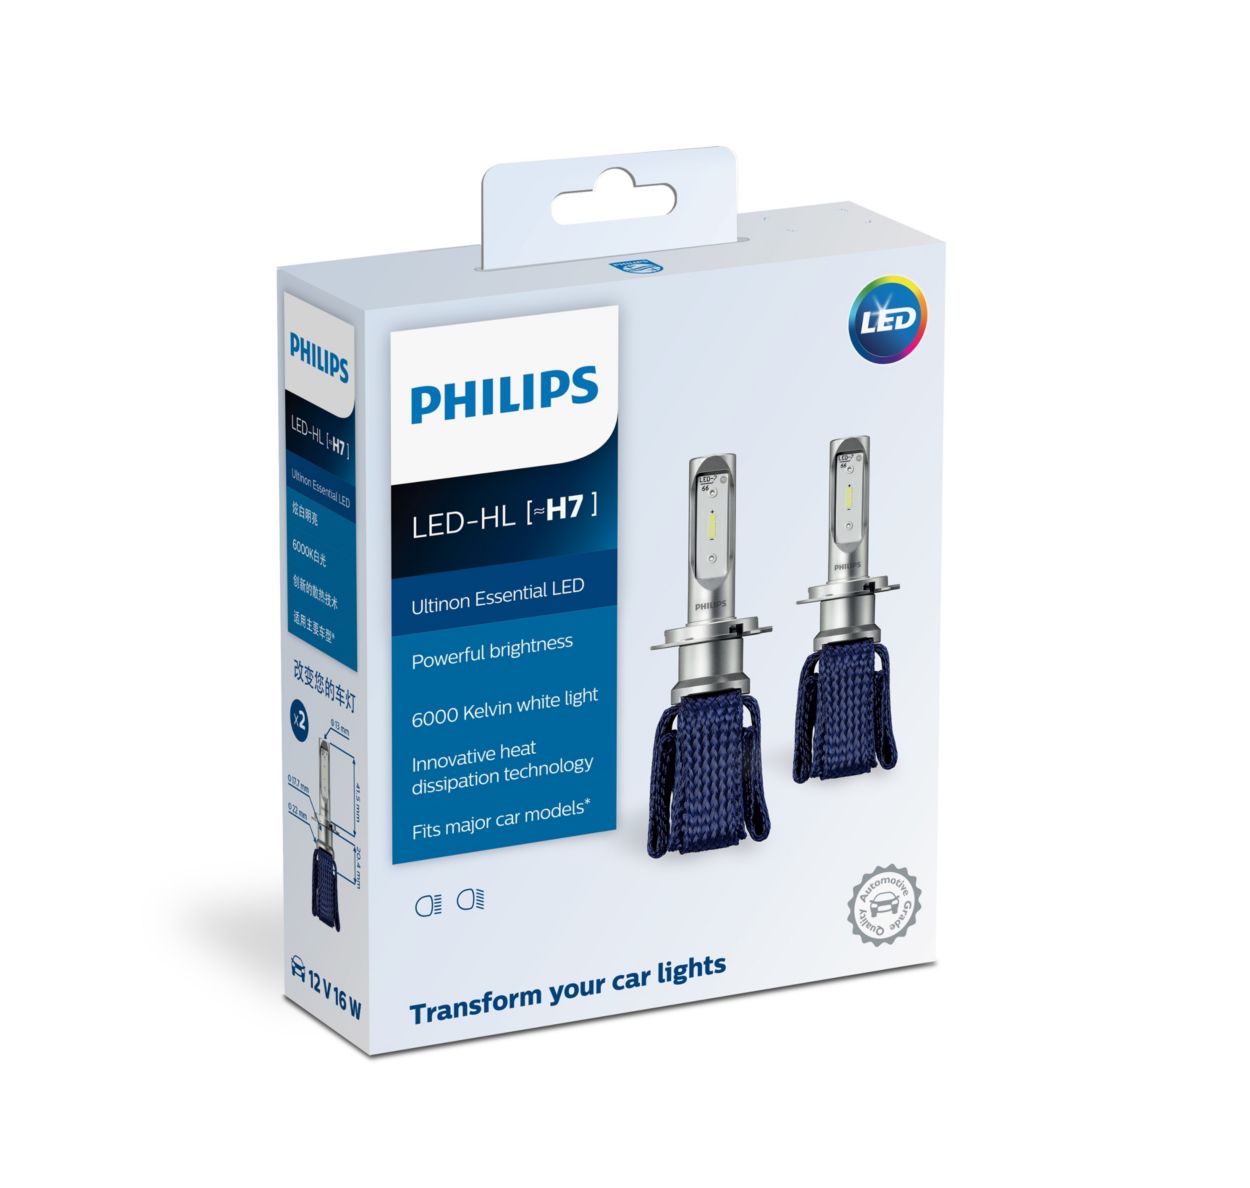 Philips Ultinon Essential LED S2 H7 (2nd Gen) 6500K True White +